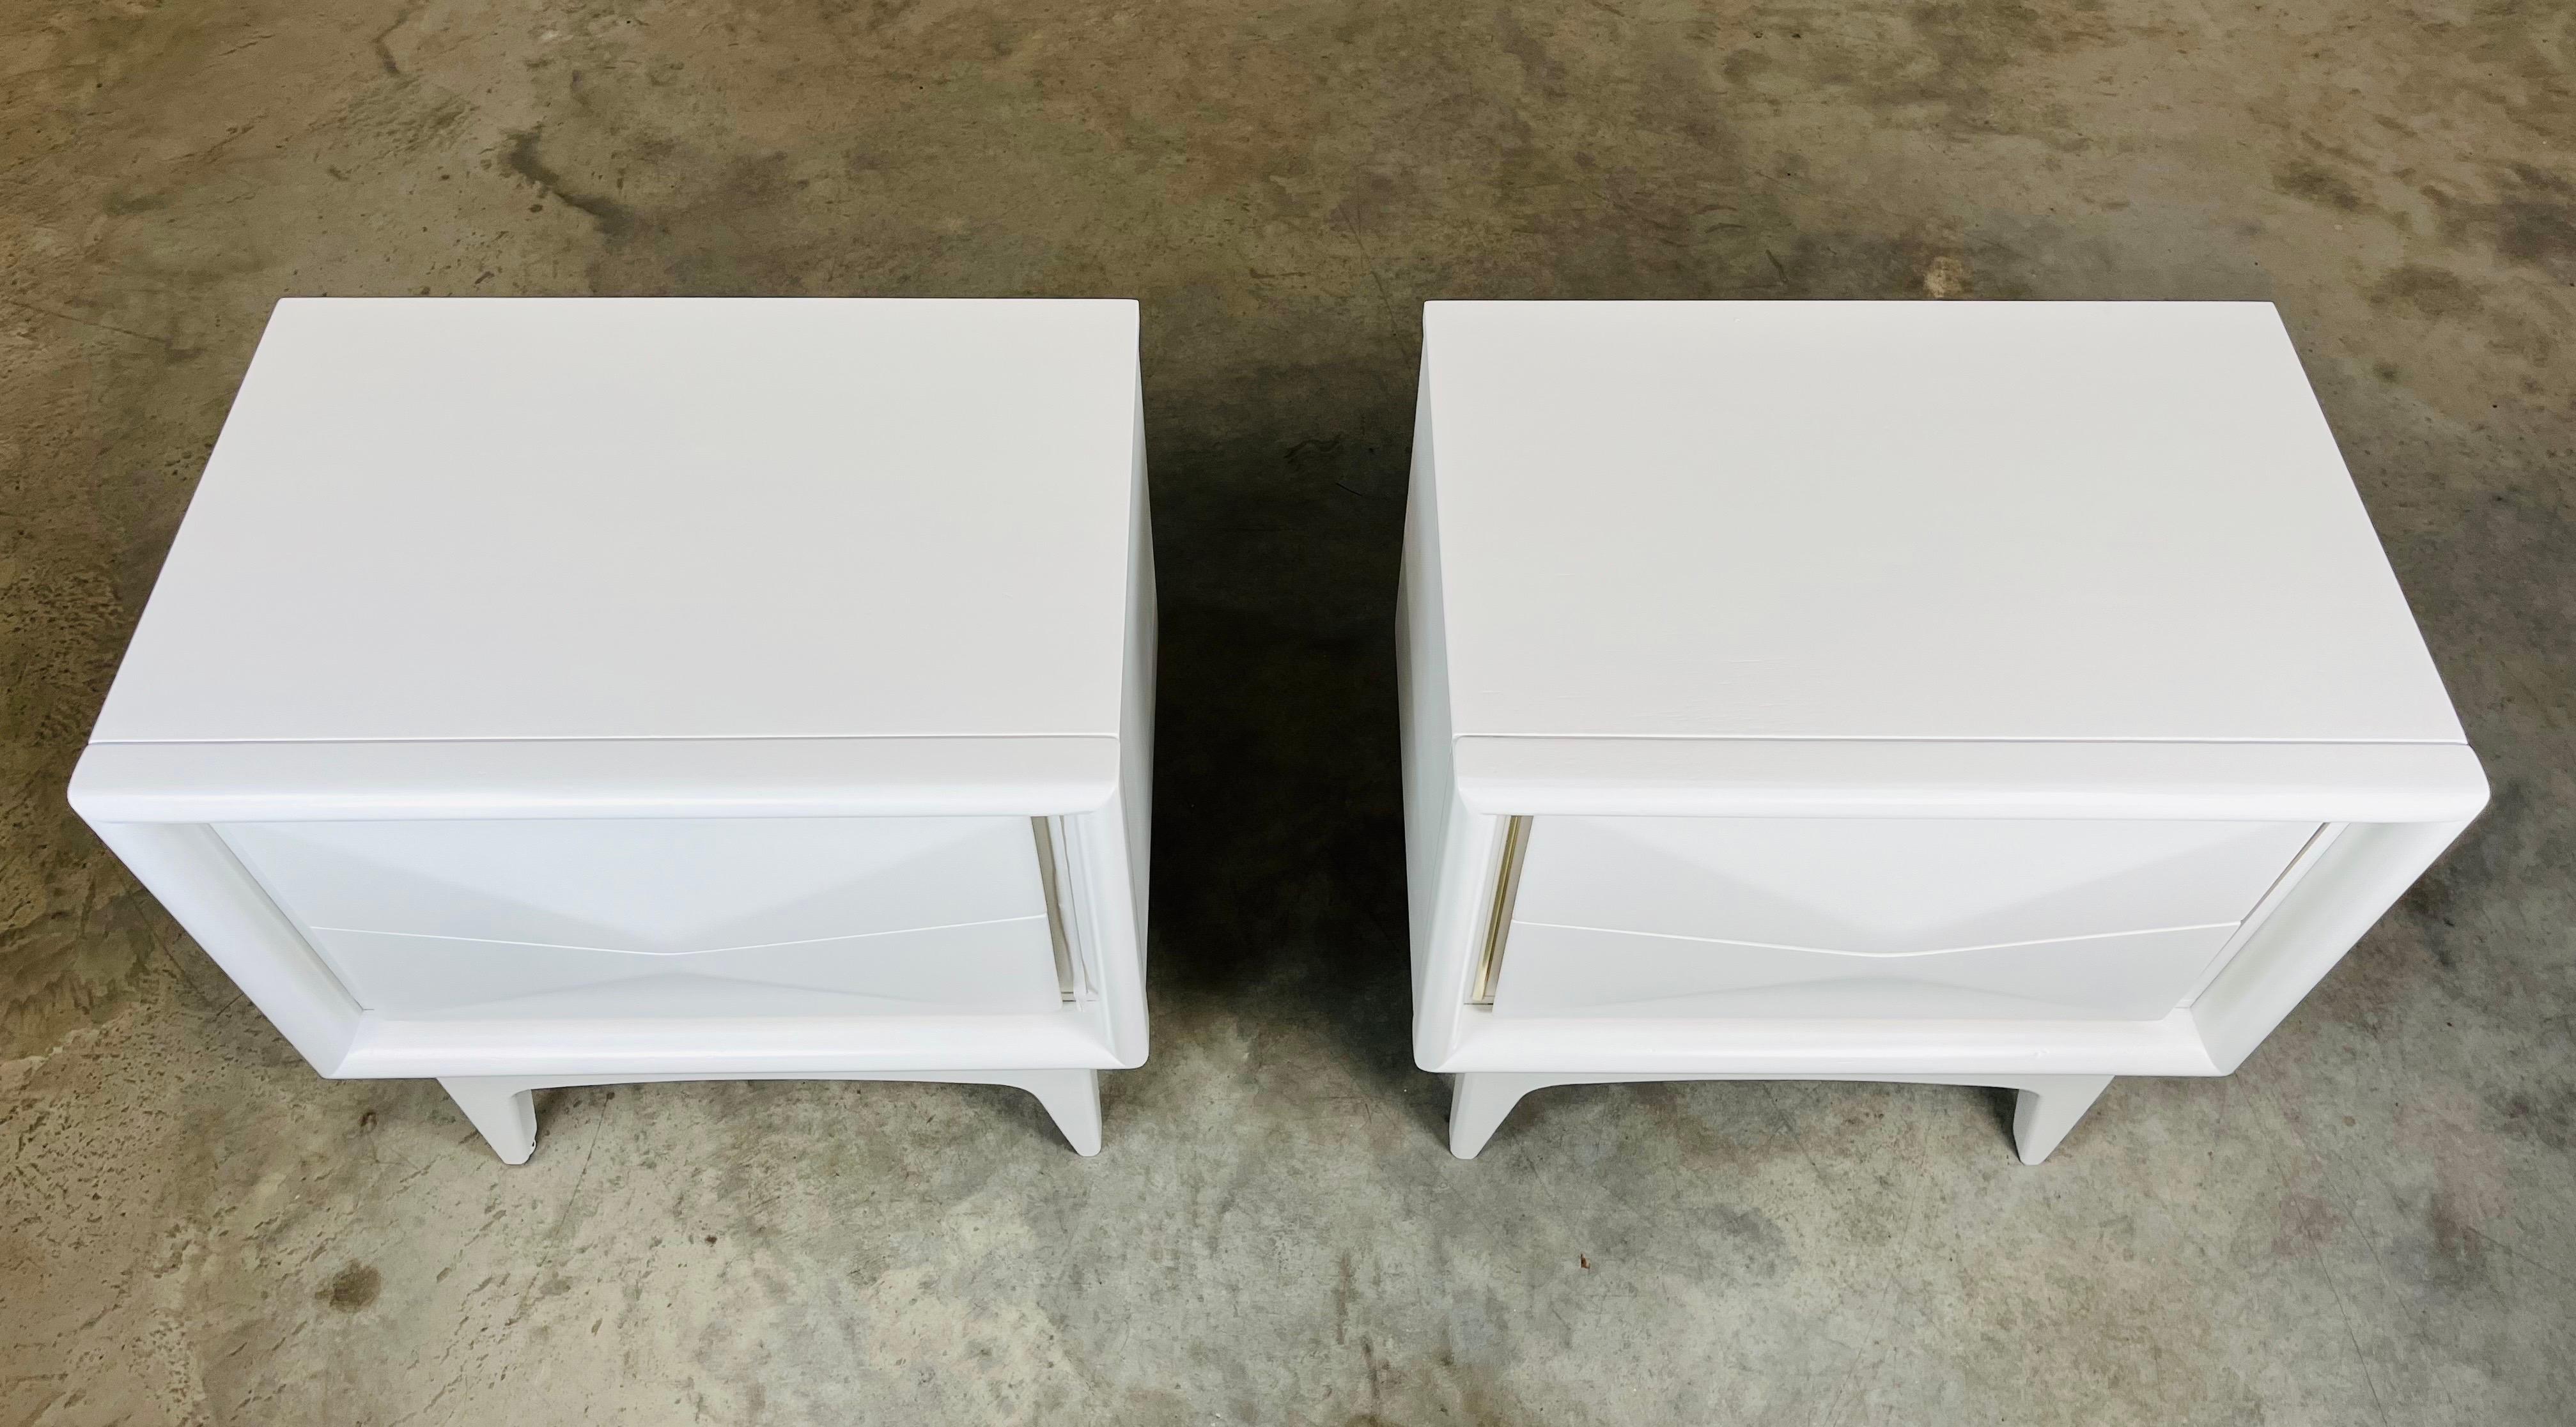 A stunning pair of mid-century modern nightstands having sculptural convex diamond fronts raised on bases with four tapered legs.
In outstanding vintage condition. Cleaned and ready for use!
25x23x16” HWD
NOTE: We also have the matching 9-drawer